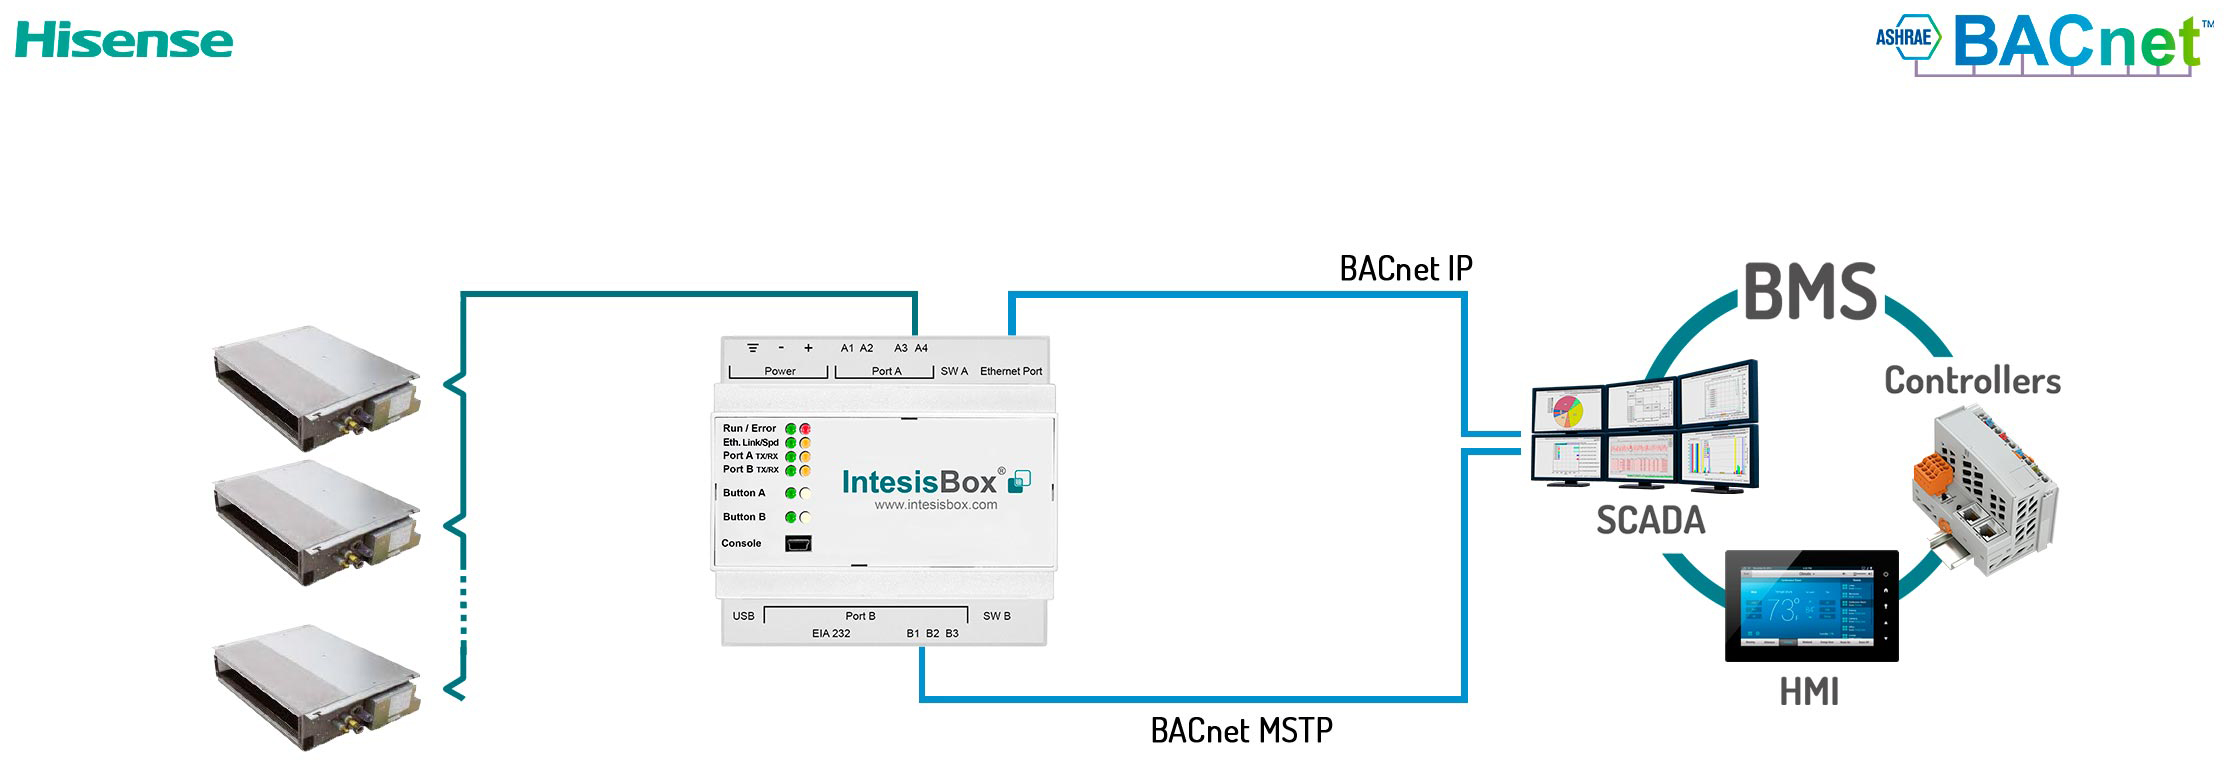 Operation diagram of the Hisense VRF systems to BACnet Gateway